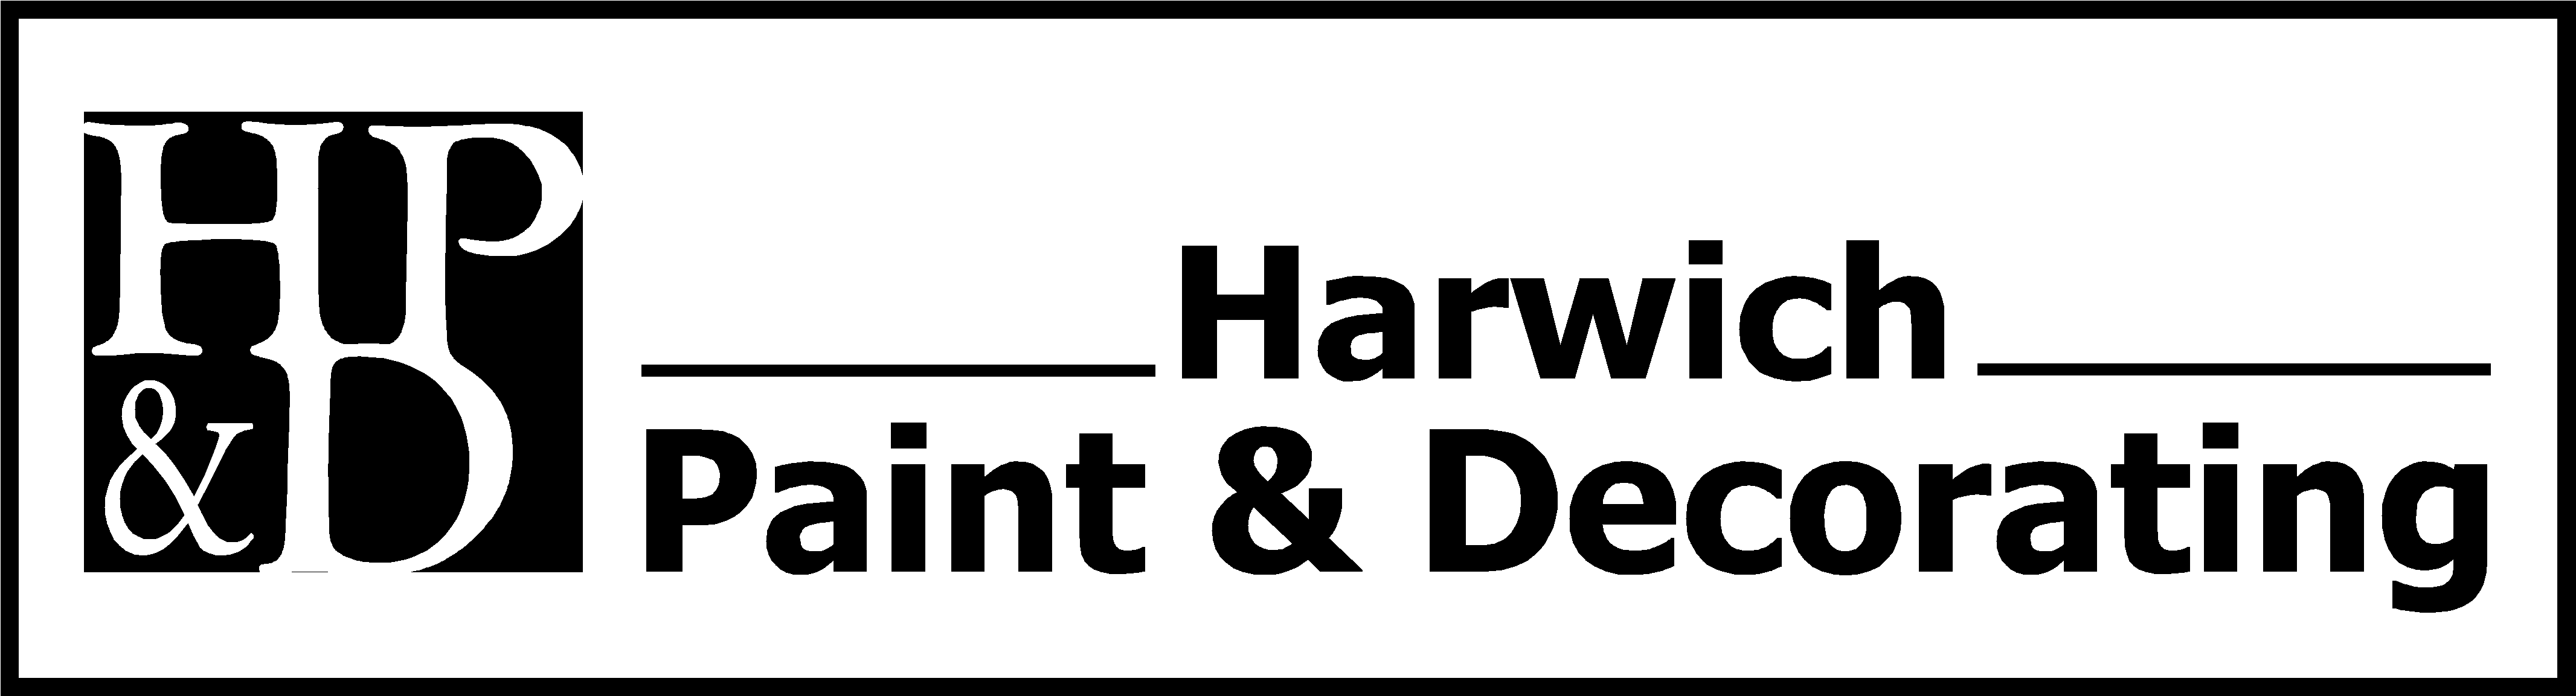 Harwich Paint and Decorating logo